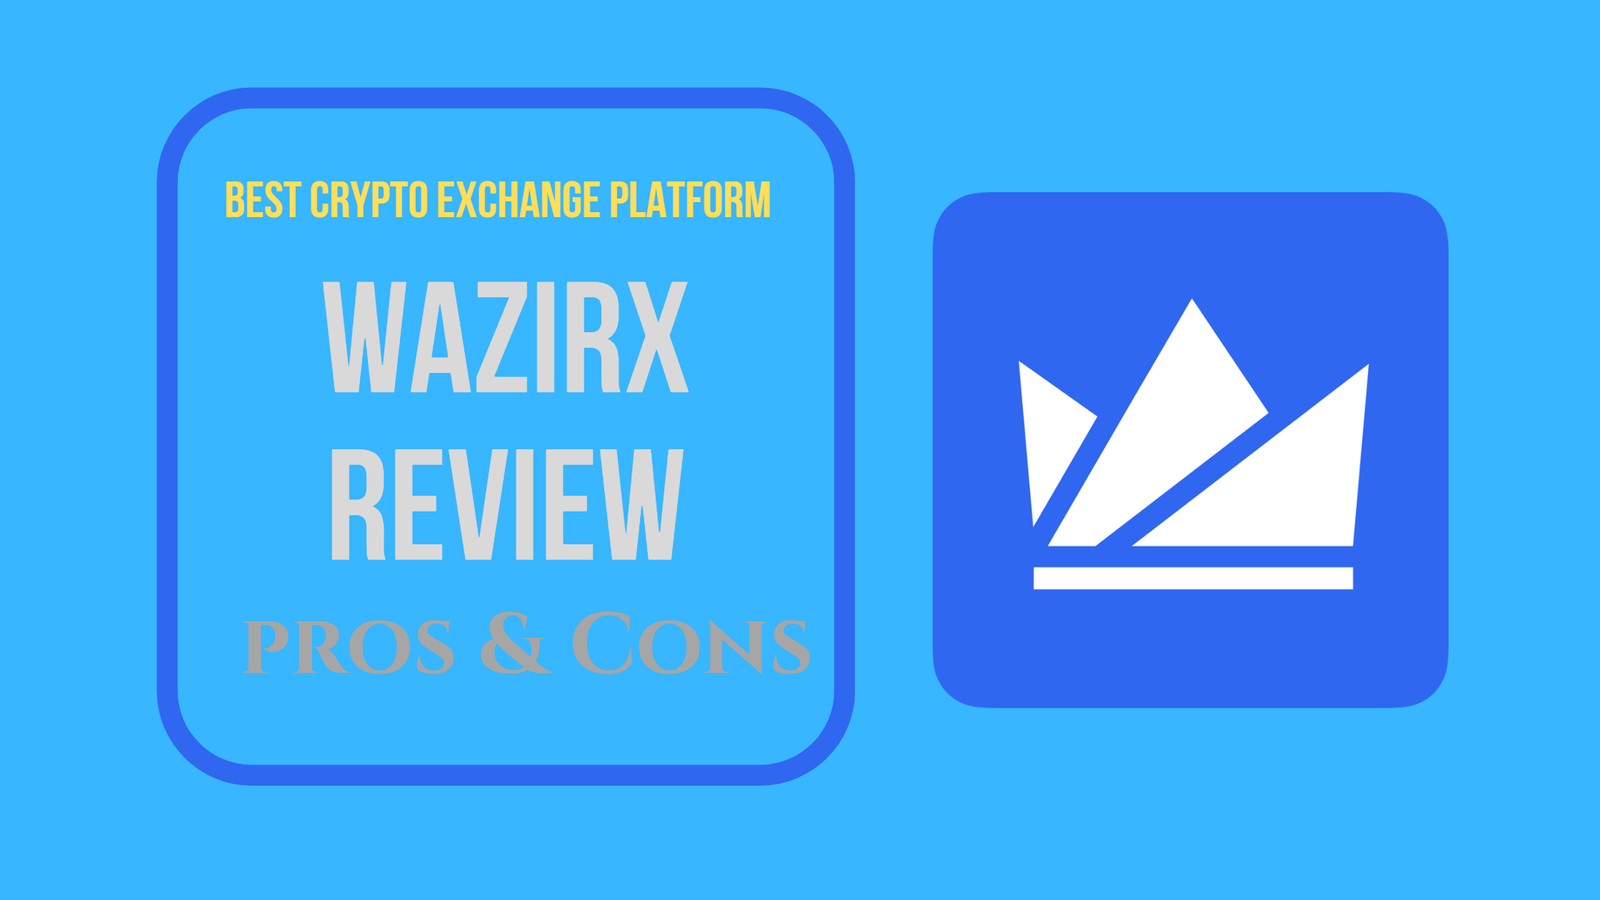 Wazirx review with pros and cons